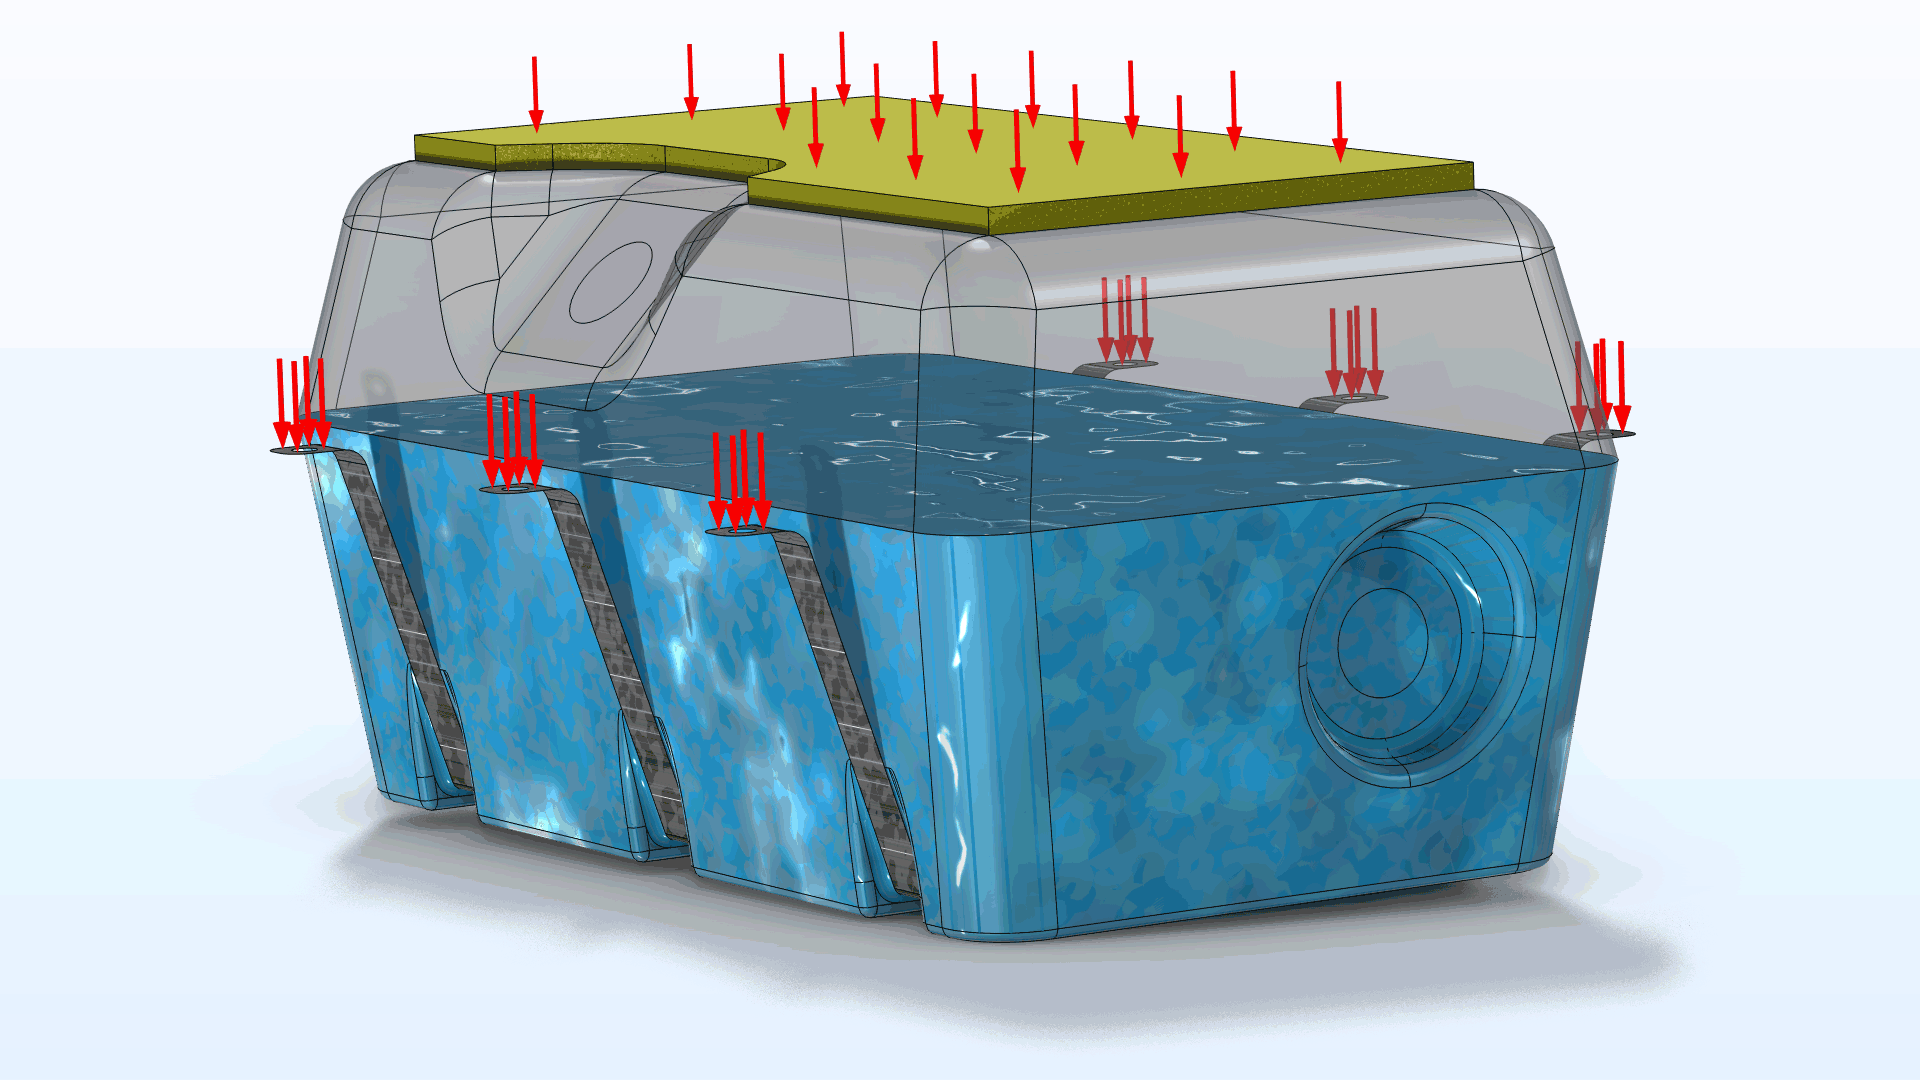 A fuel tank model showing its vibration pattern in red arrows.